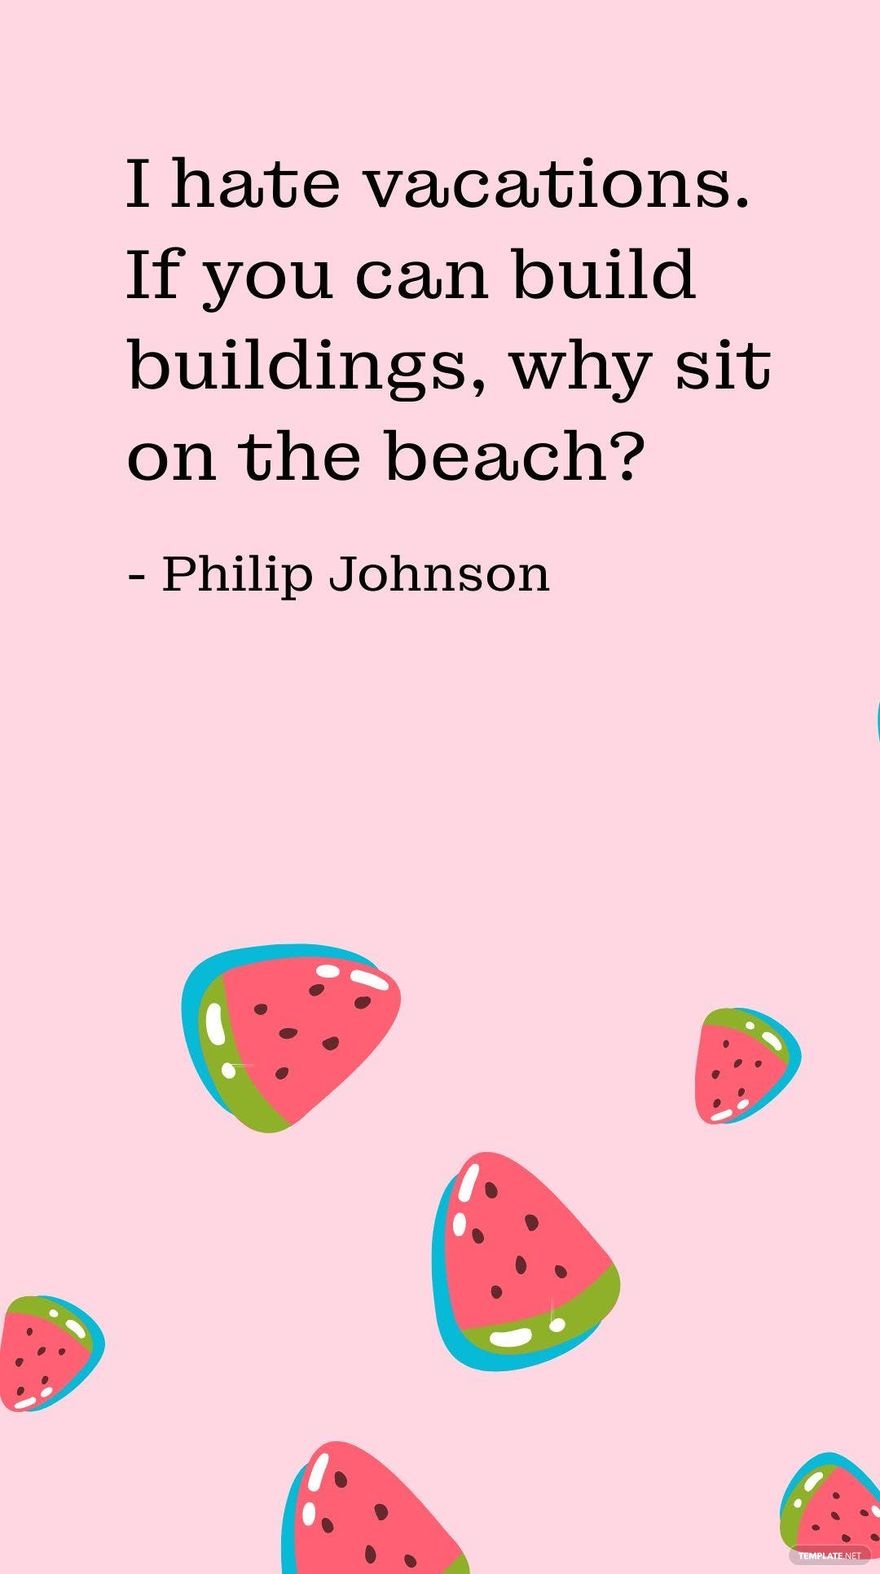 Philip Johnson - I hate vacations. If you can build buildings, why sit on the beach?